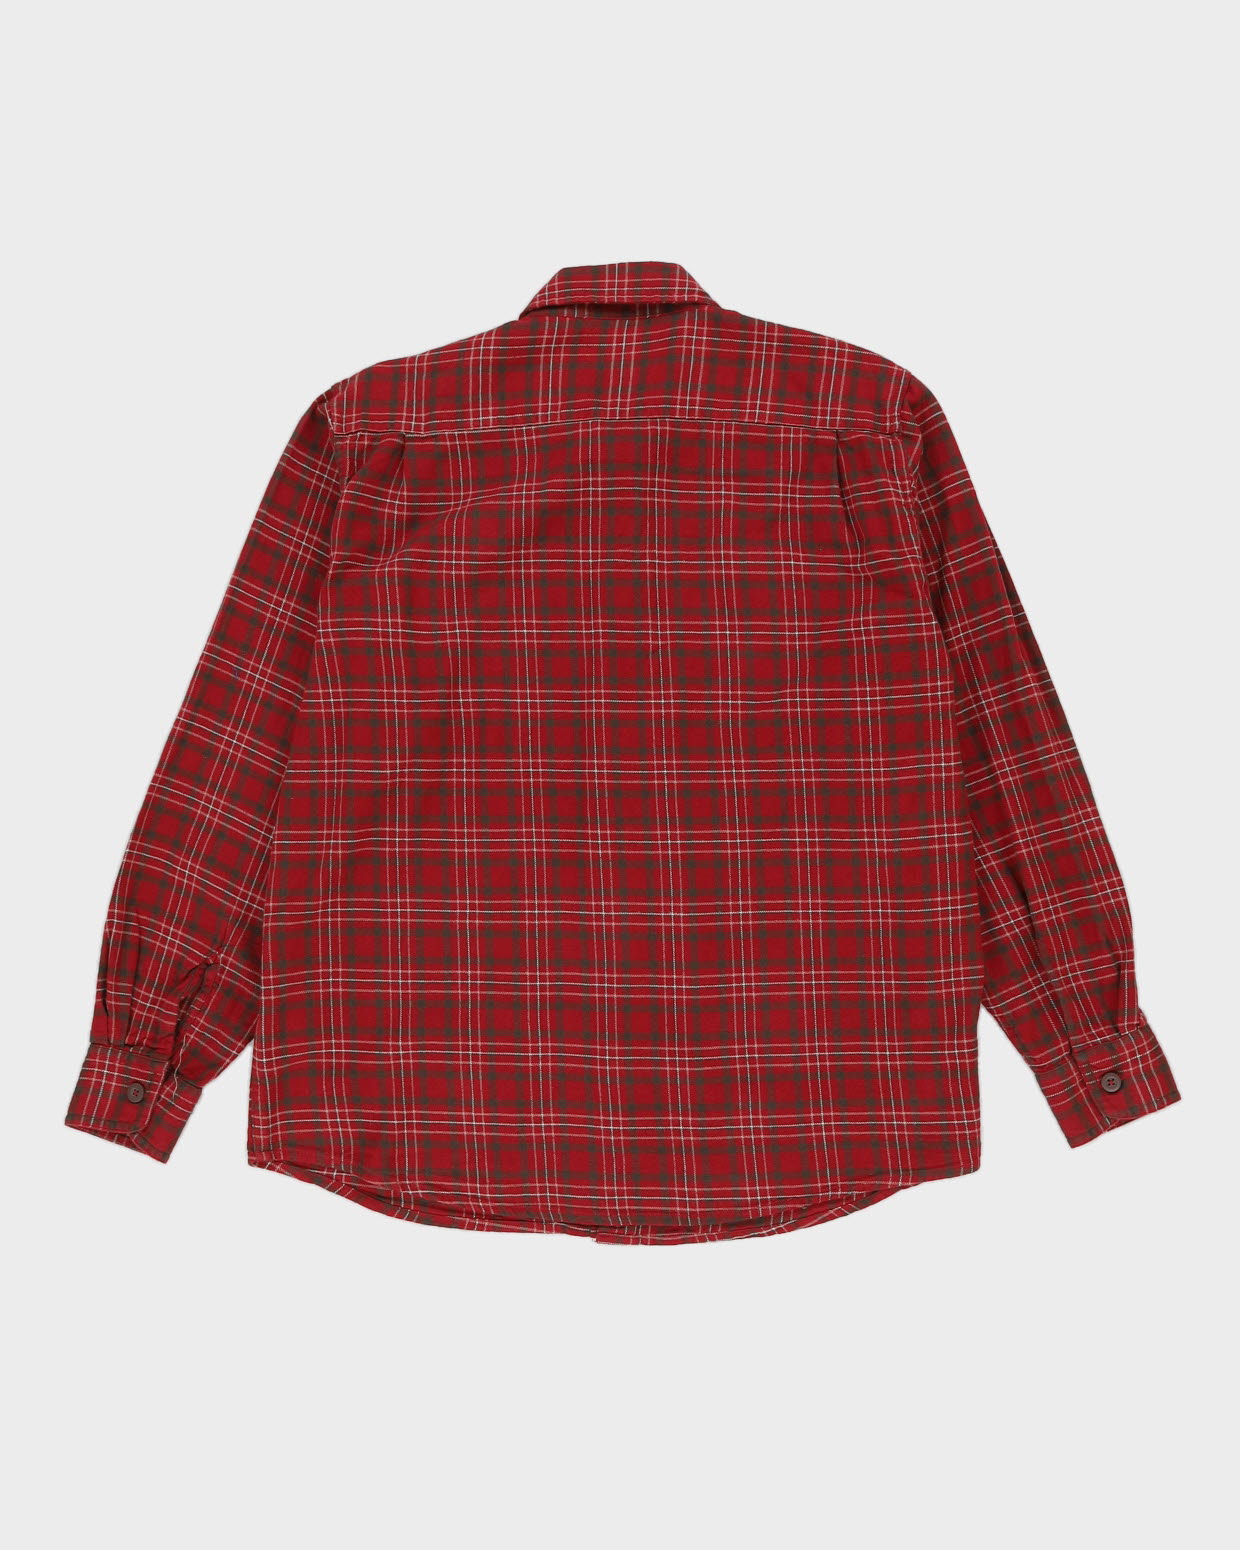 Wrangler Red Checked Cotton Flannel Shirt - XL